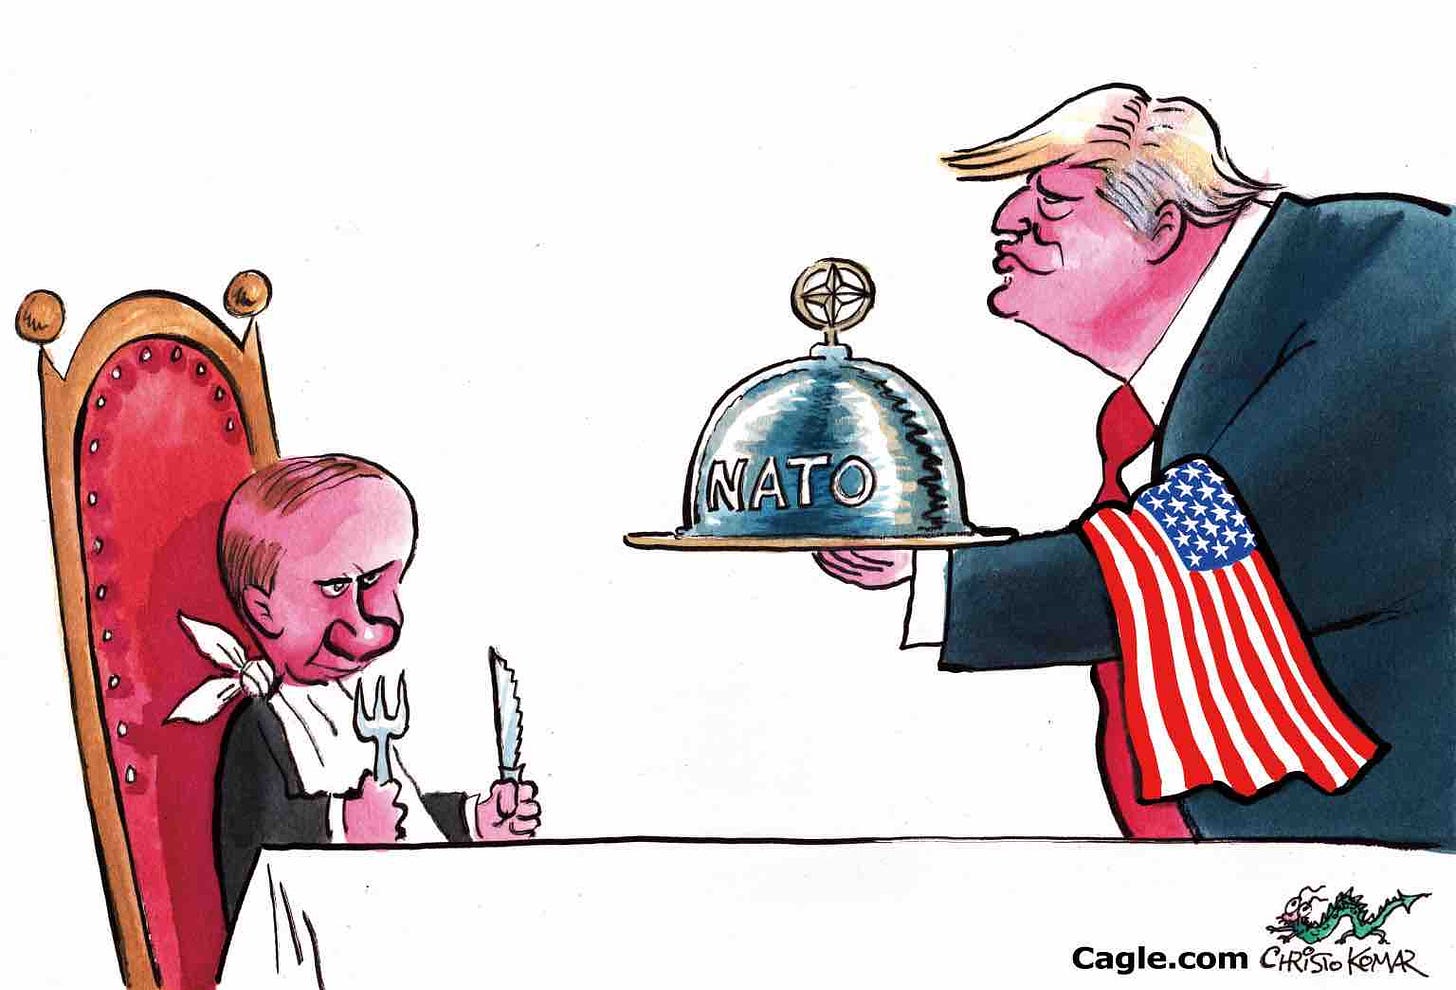 Trump has been bought by Putin